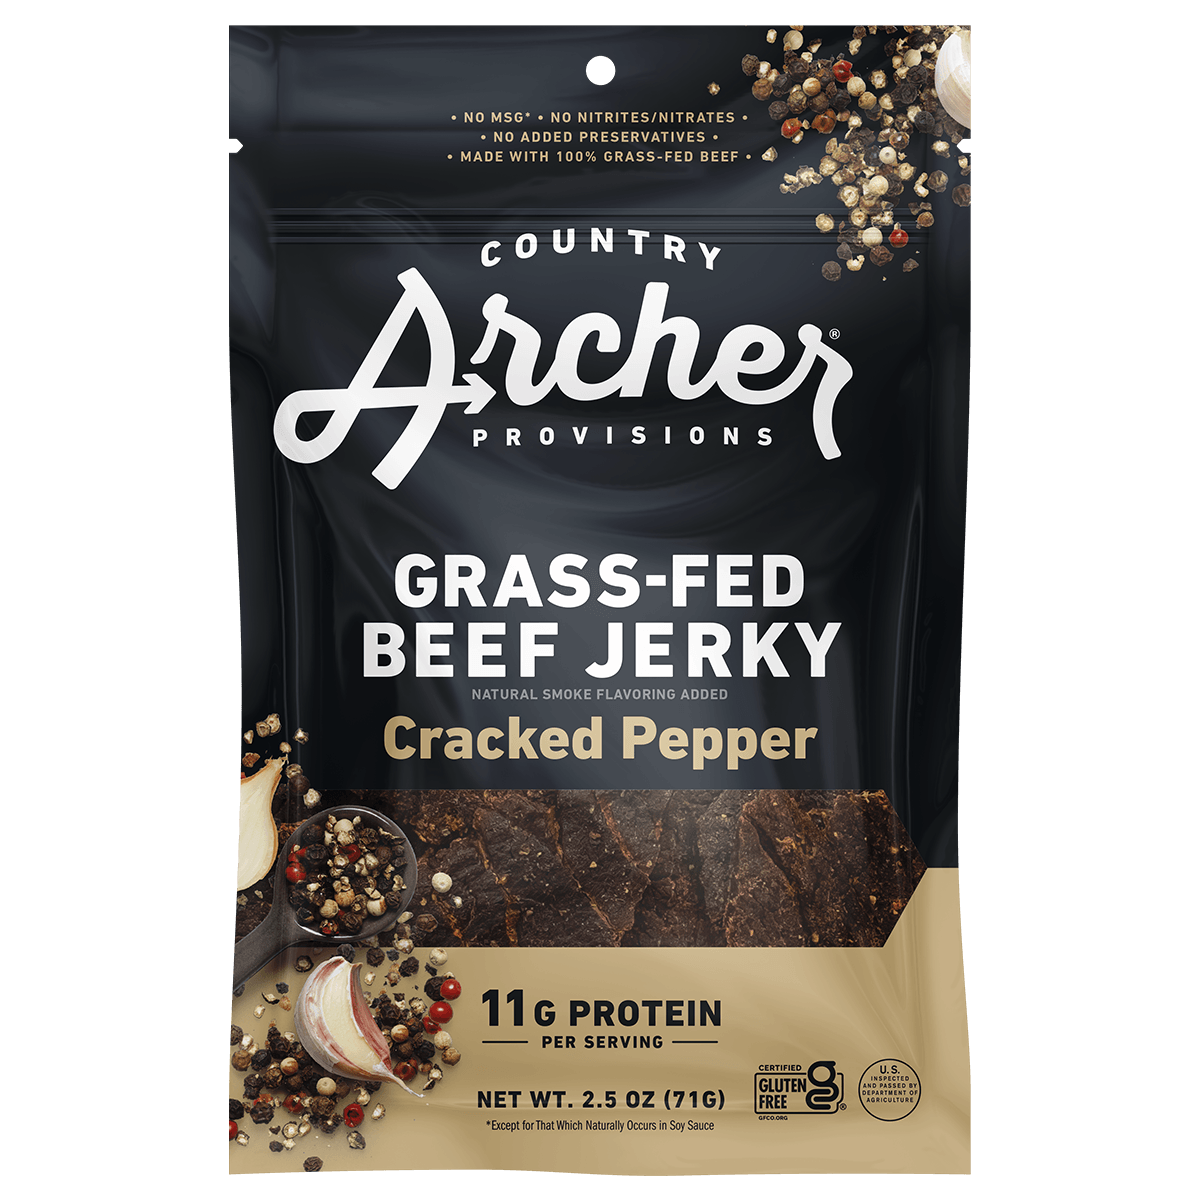 Country Archer Provisions